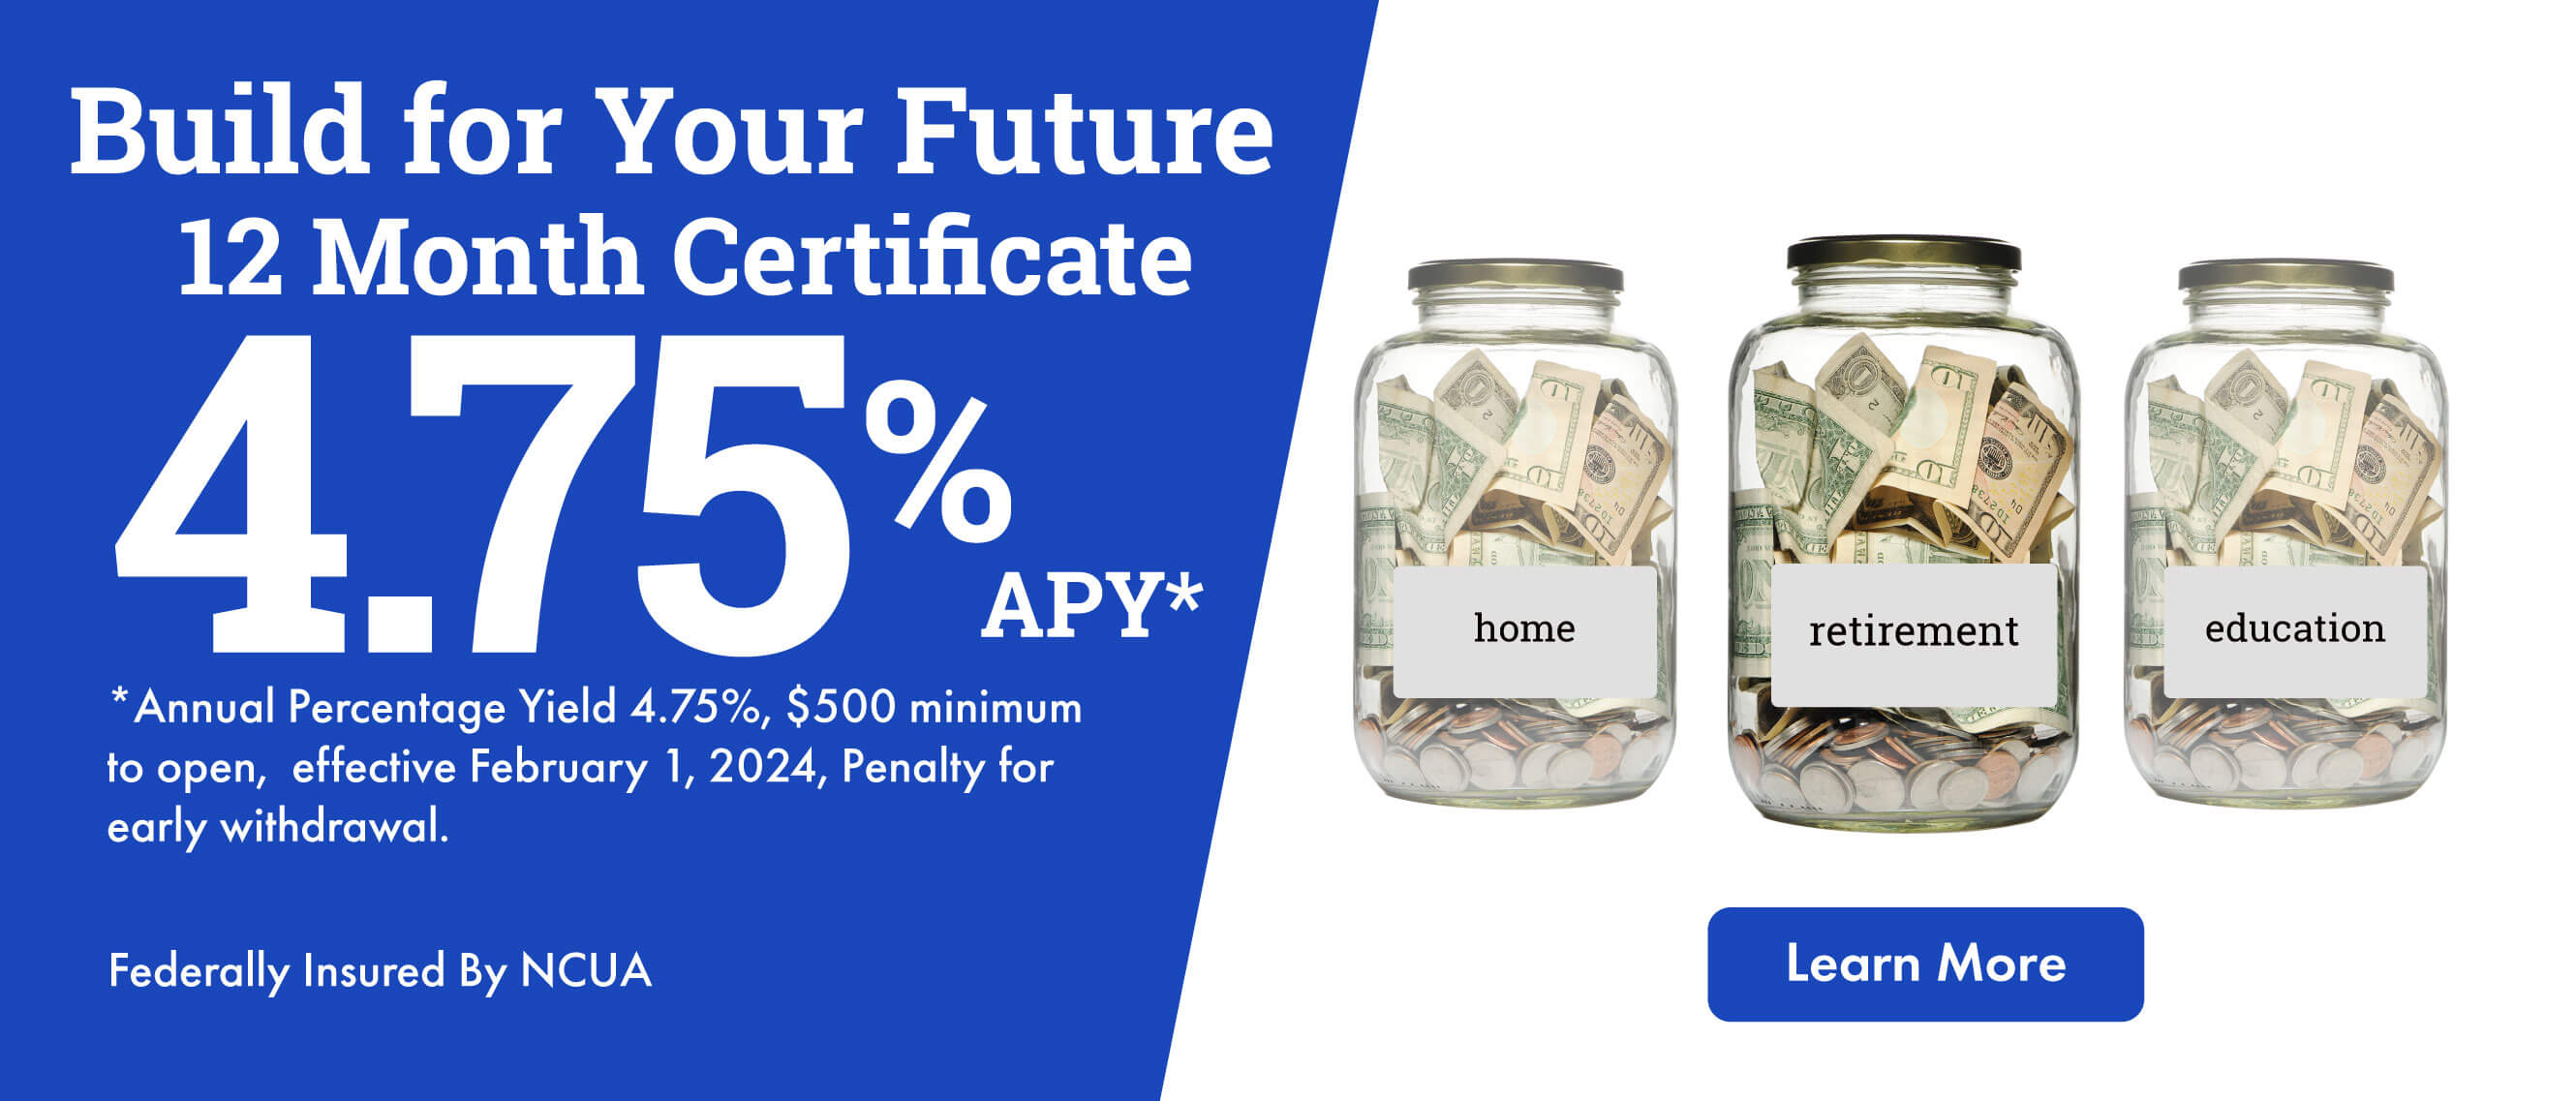 Build for Your Future 12 Month CD 4.75%  APY* *Annual Percentage Yield 4.75%, $500 minimum to open, effective February 1, 2023, Penalty for early withdrawal. Federally Insured By NCUA